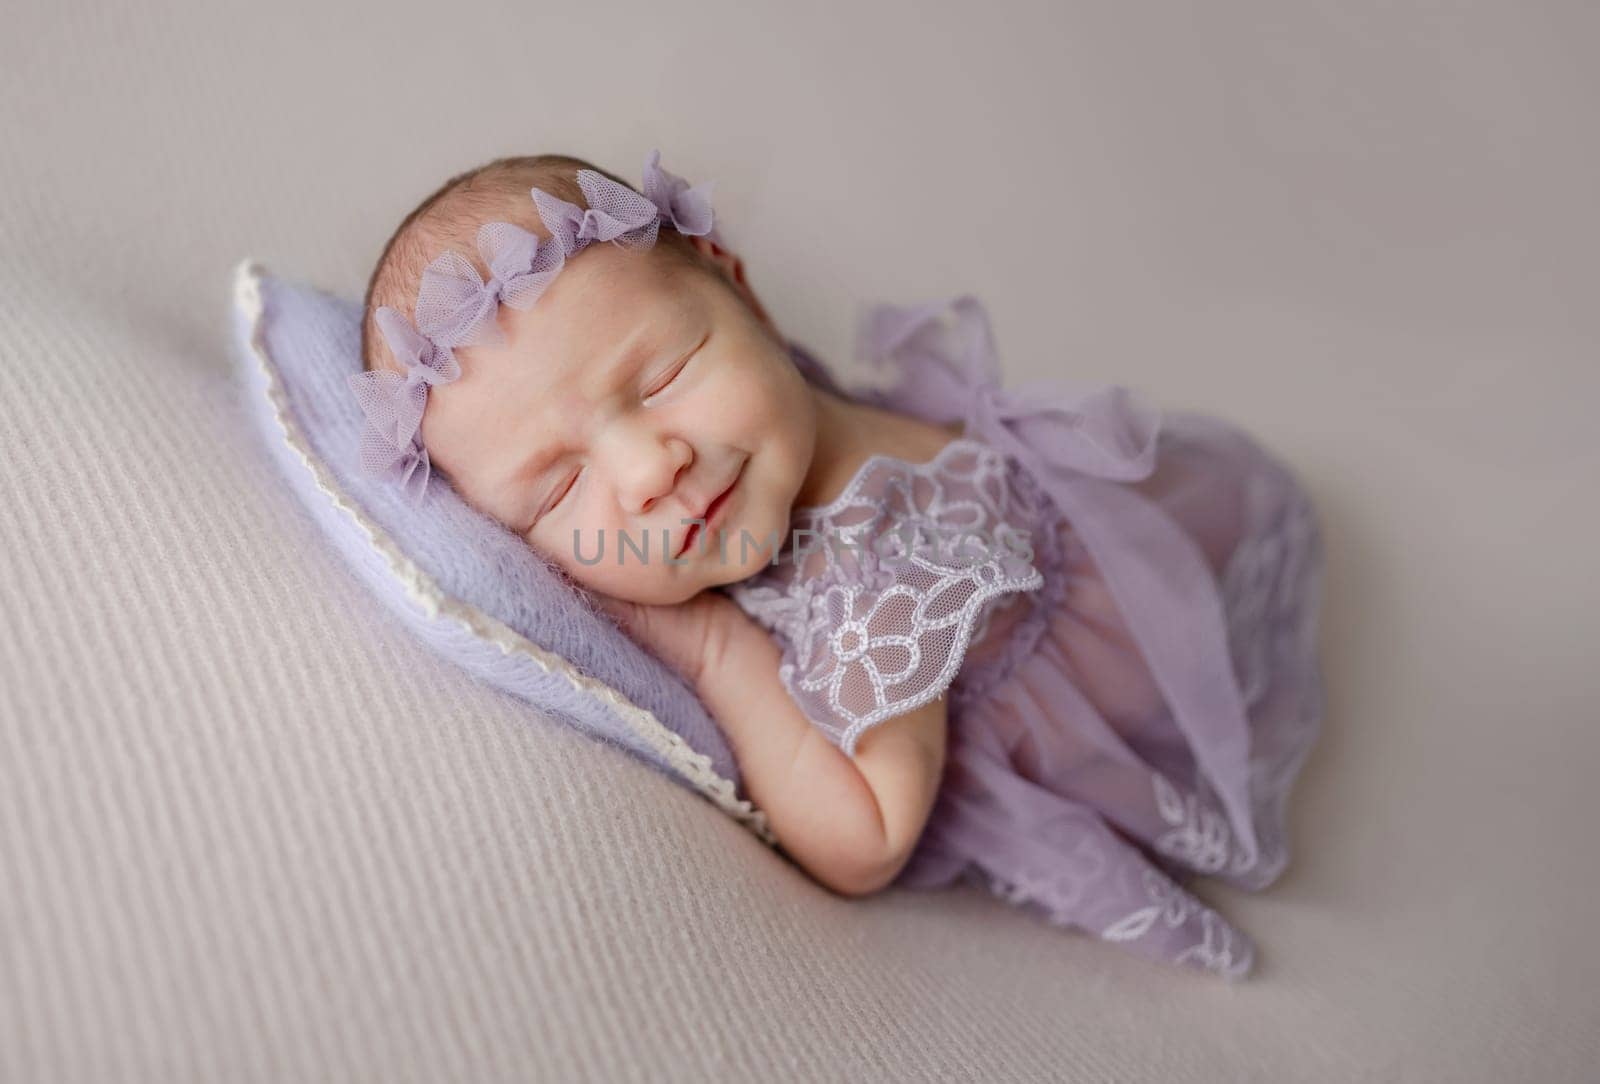 Newborn Girl In Lace Dress Sleeps And Smiles In Her Dream In Lilac Tones Photo